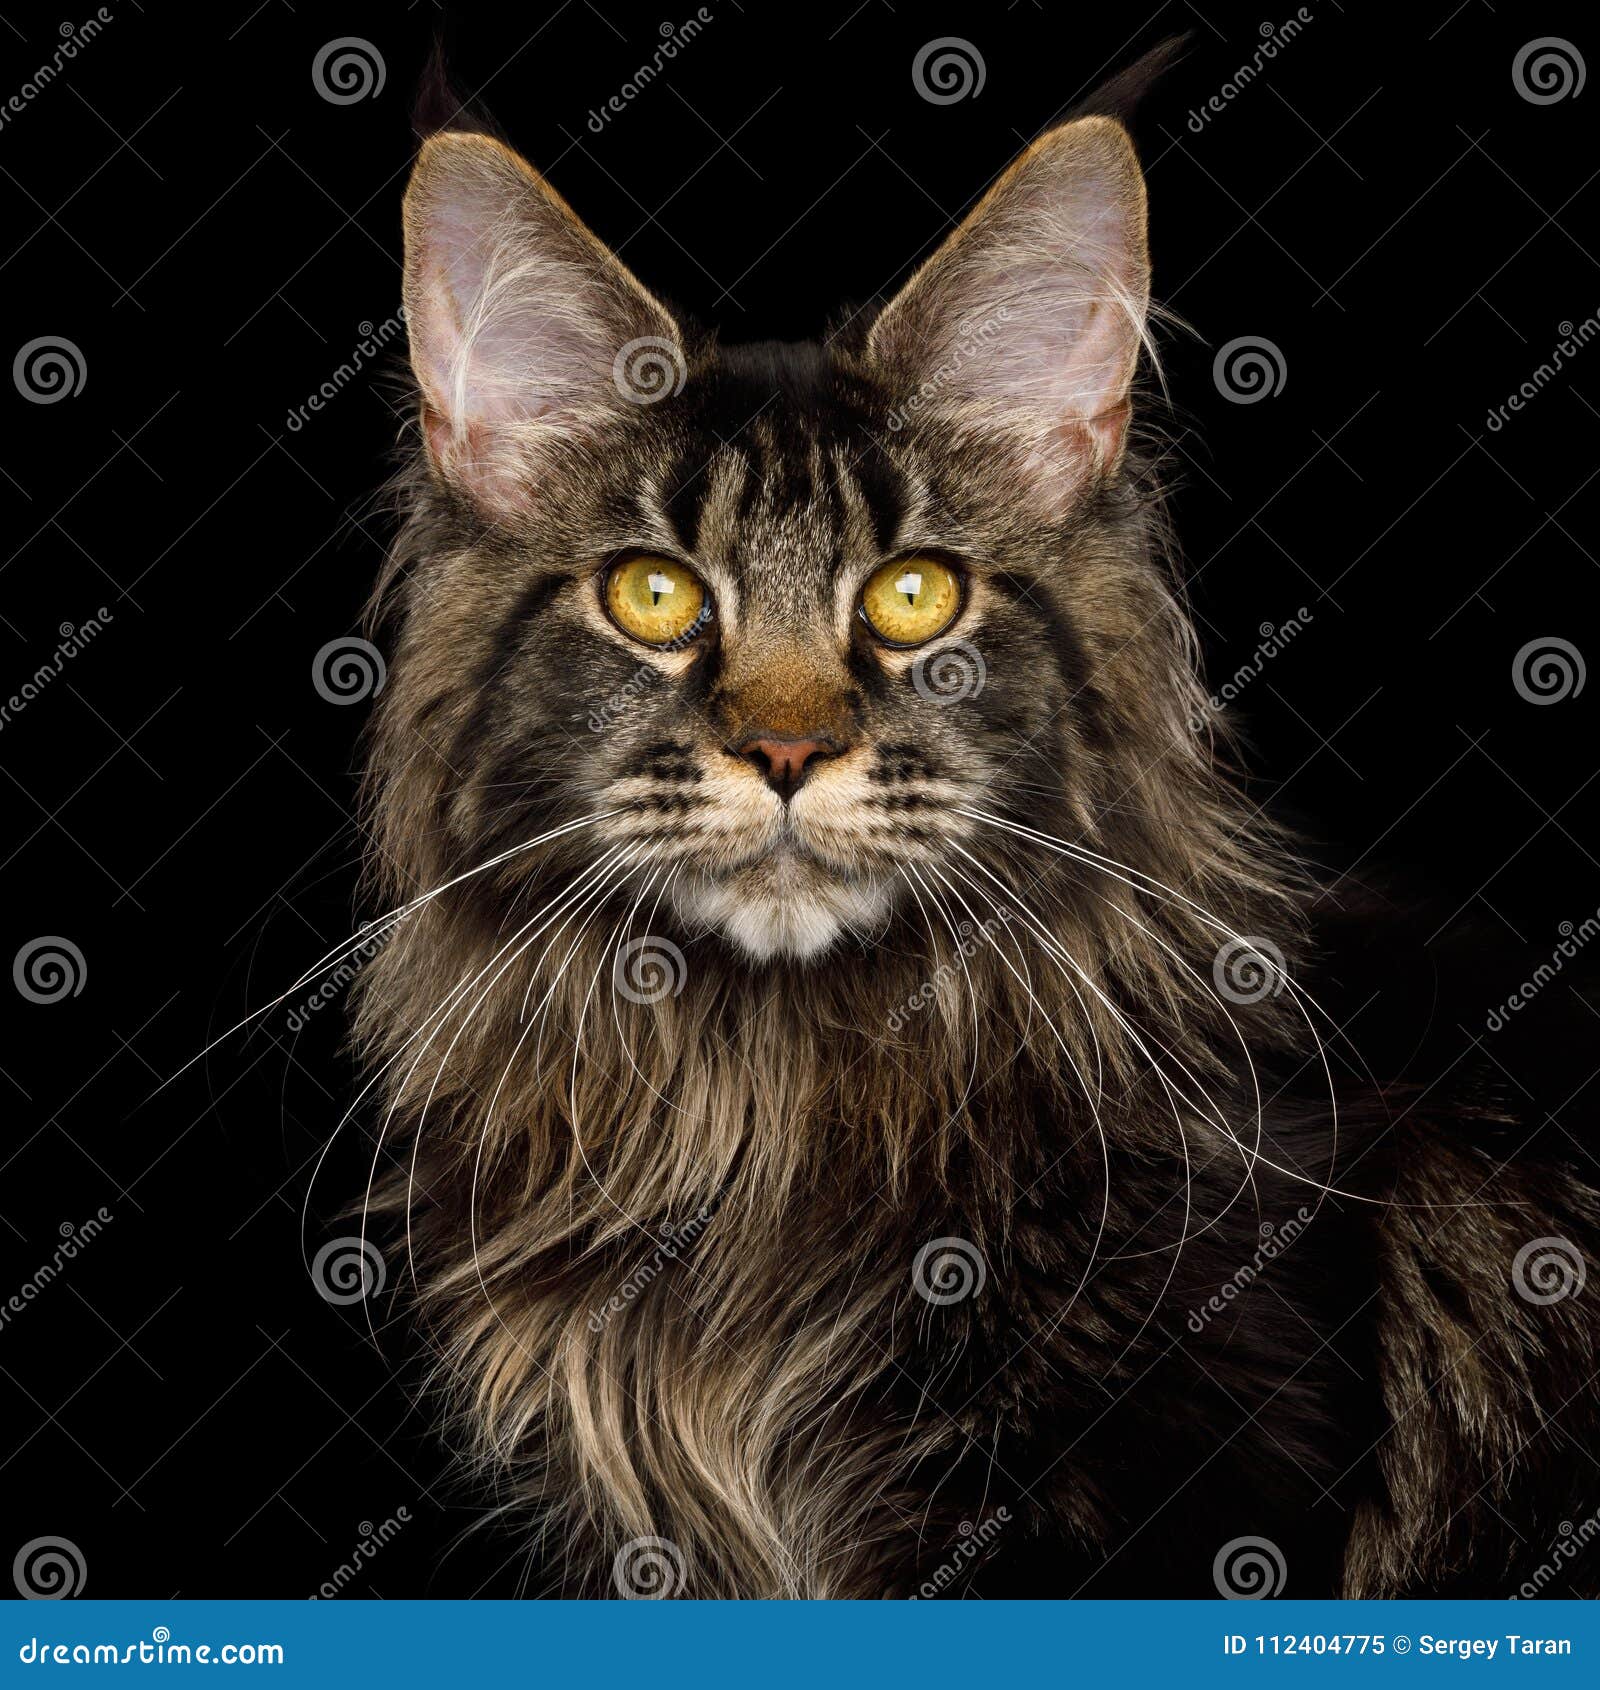 How Much Does A Maine Coon Cat Cost Why They Are So Expensive